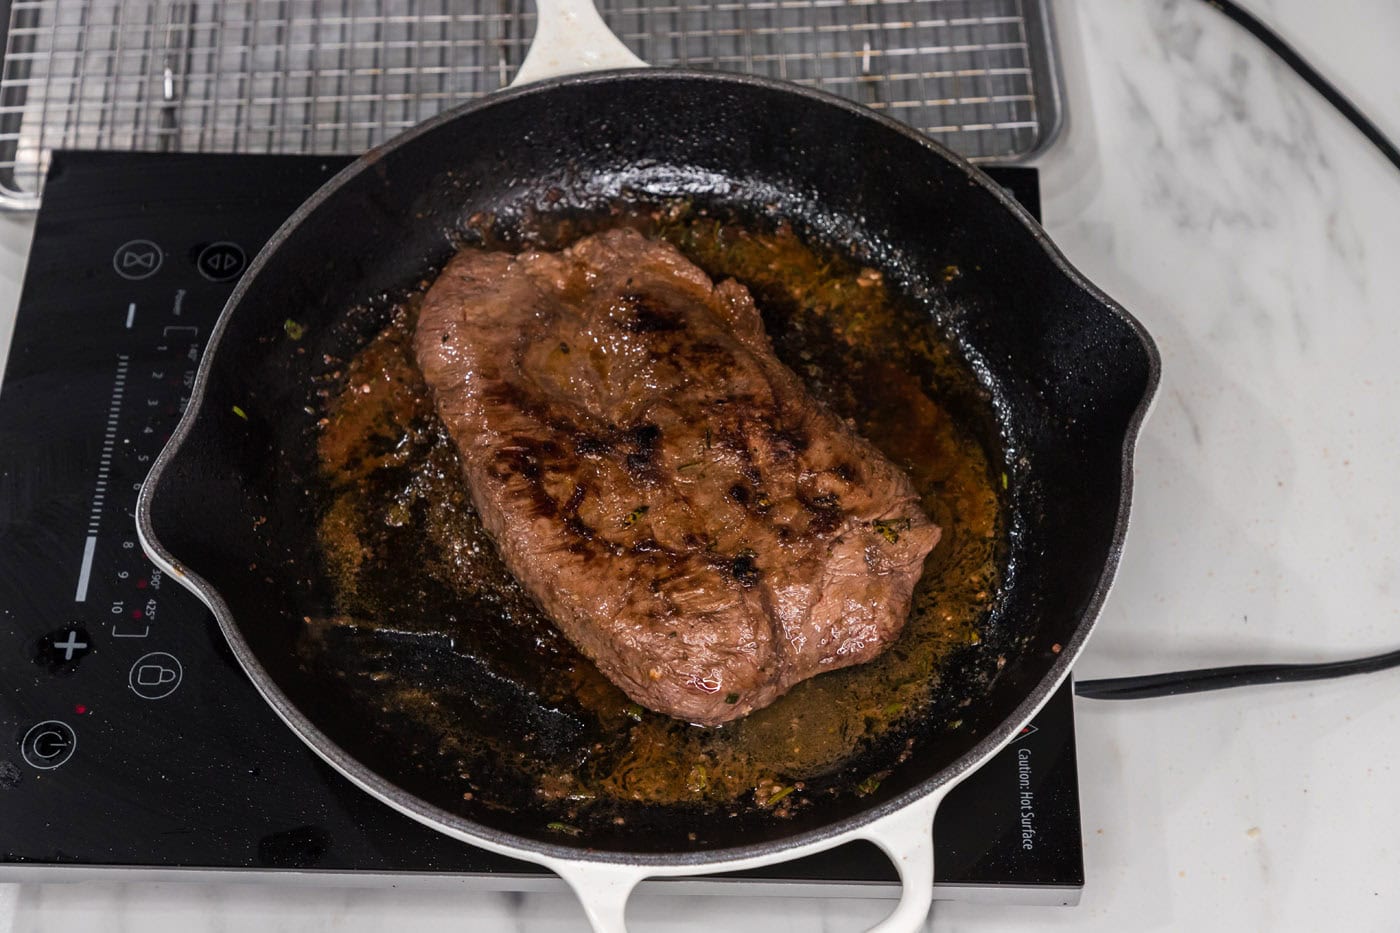 seared cooked flat iron steak in a skillet